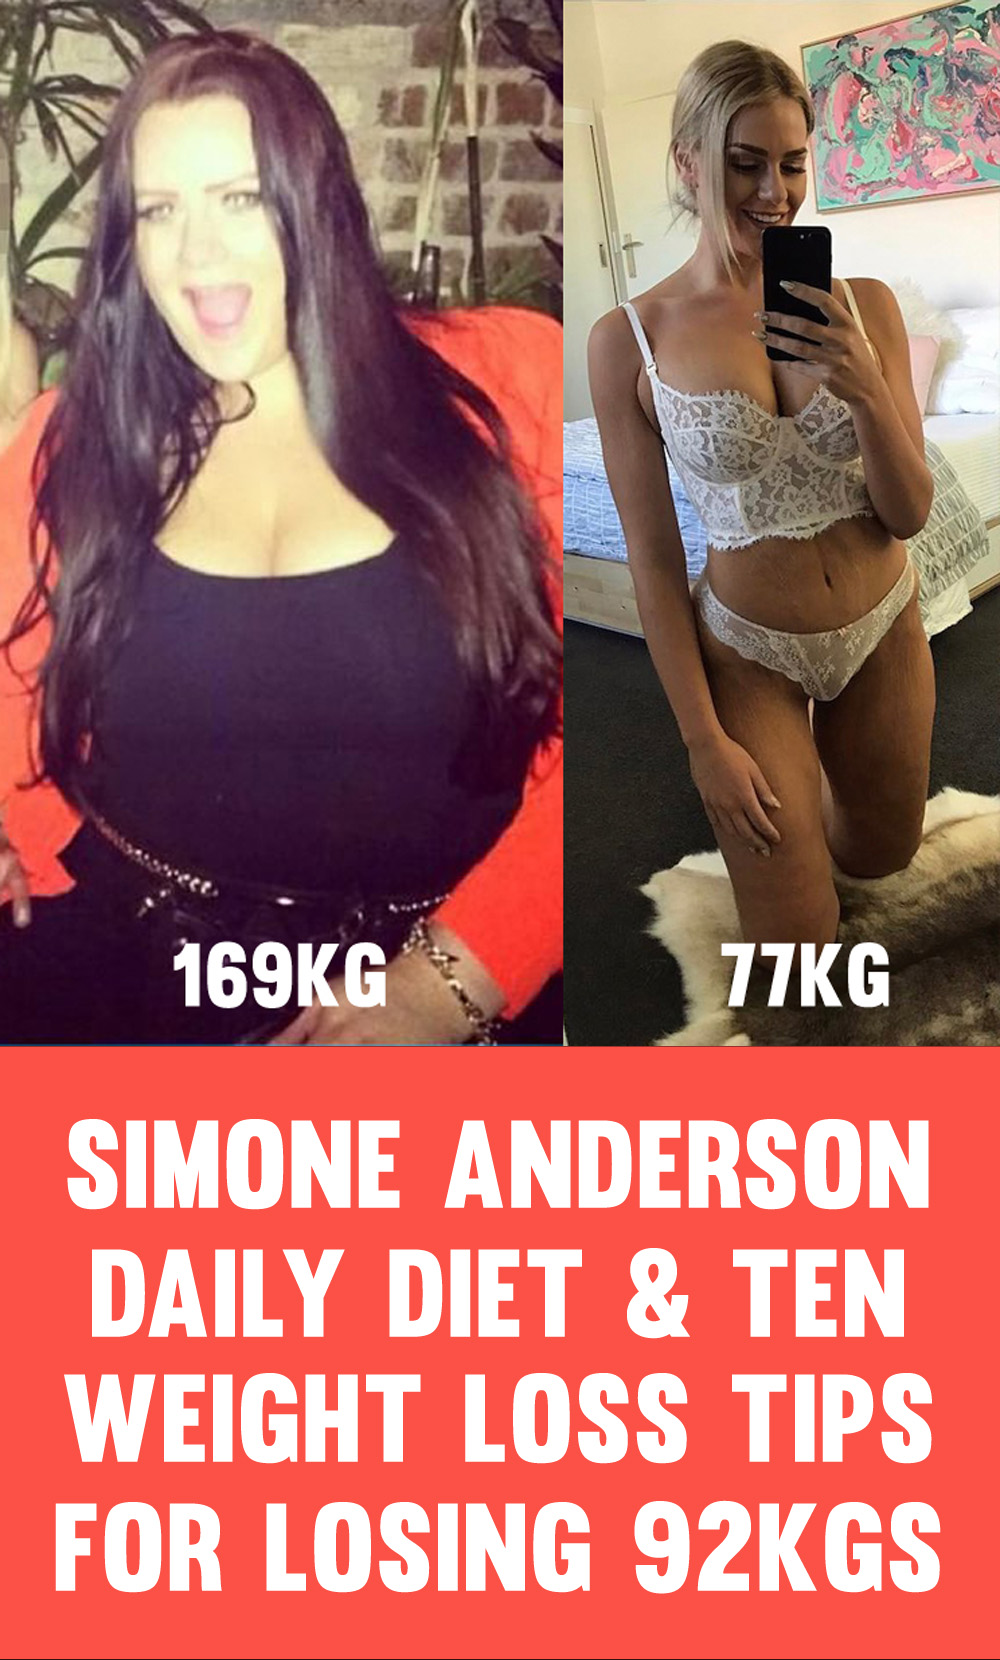 Simone Anderson Daily Diet And Top 10 Weight Loss Tips For Losing 92kgs